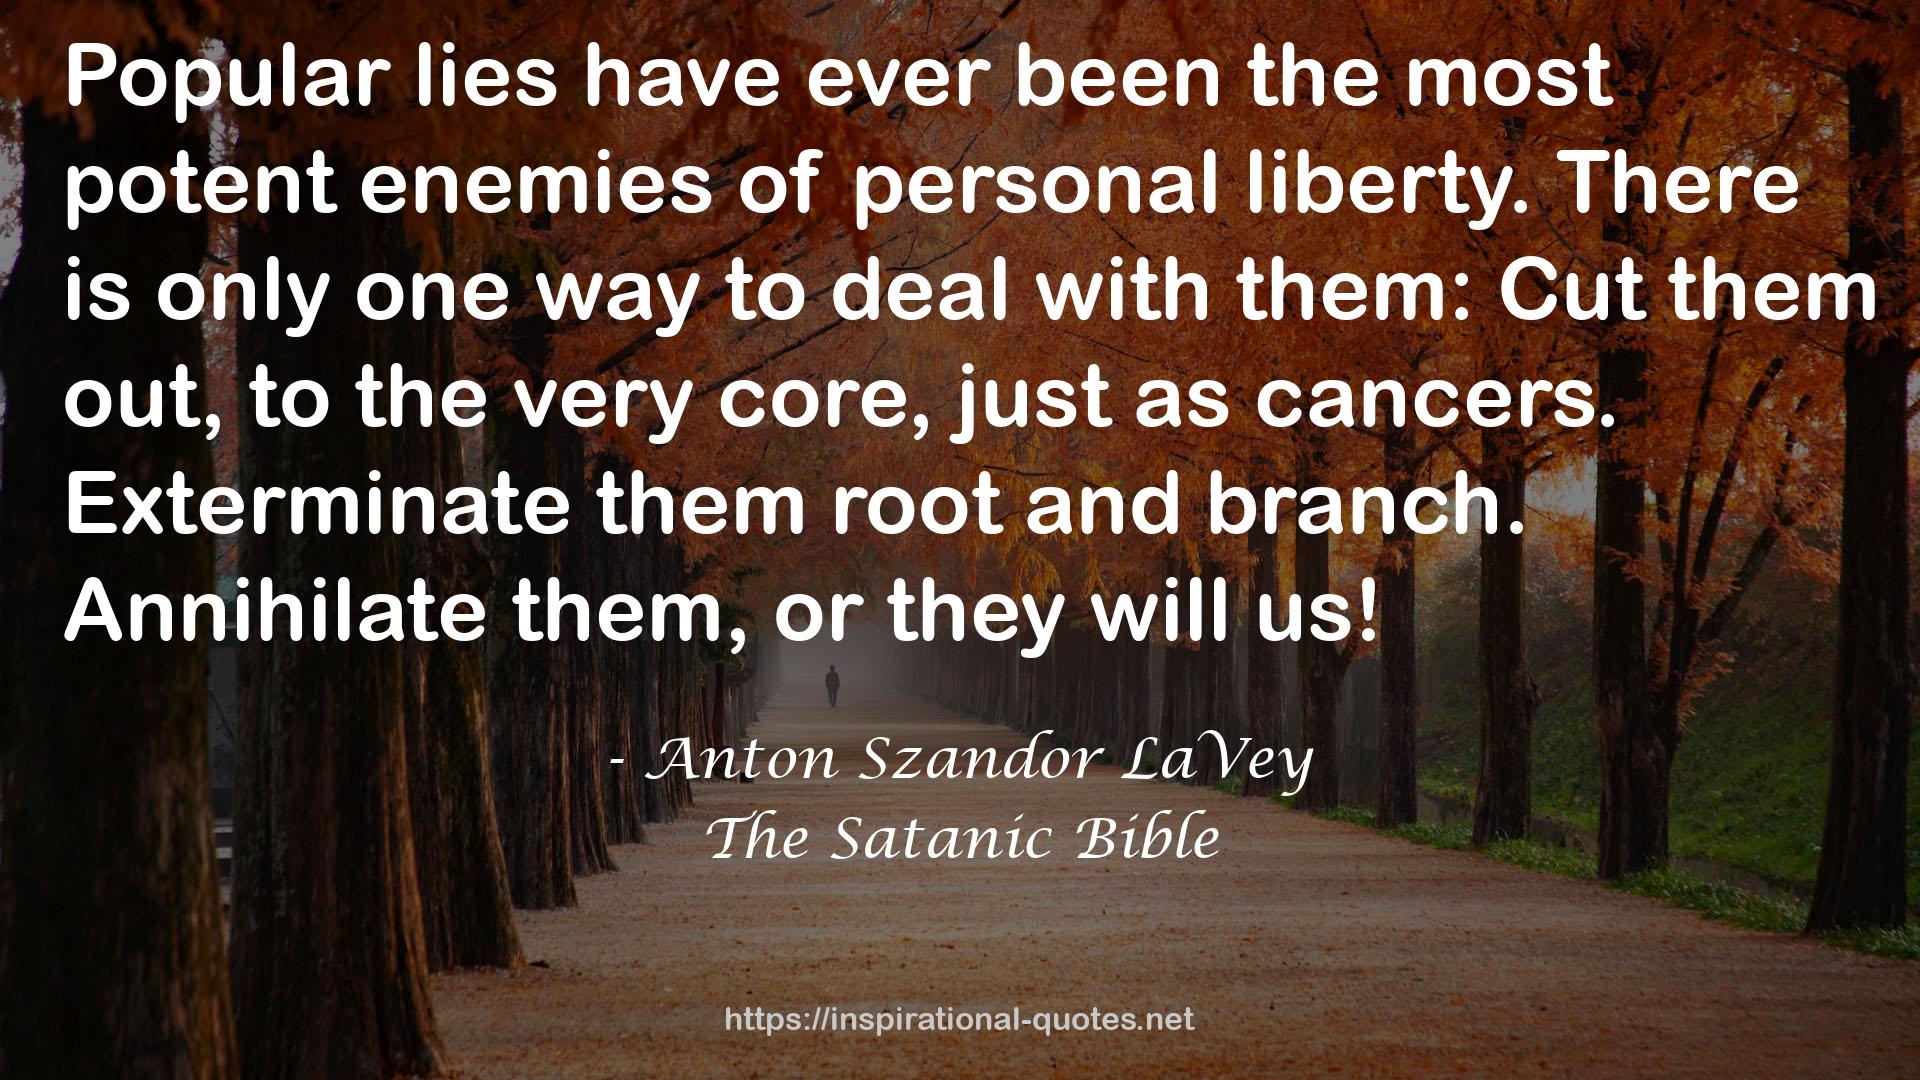 The Satanic Bible QUOTES